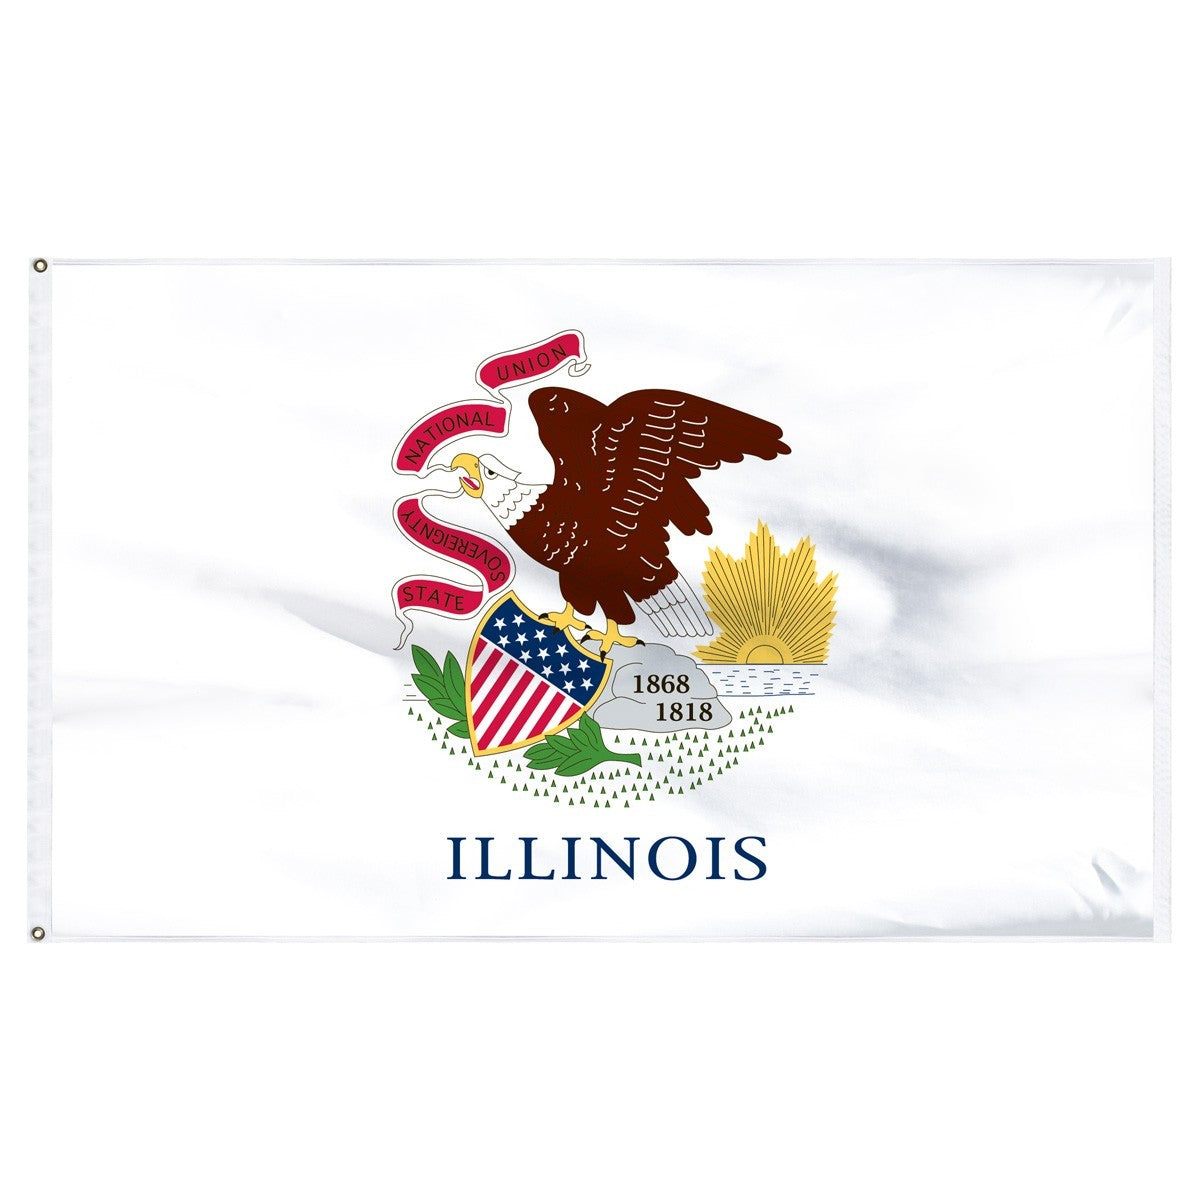 Illinois flags for sale by 1-800 Flags